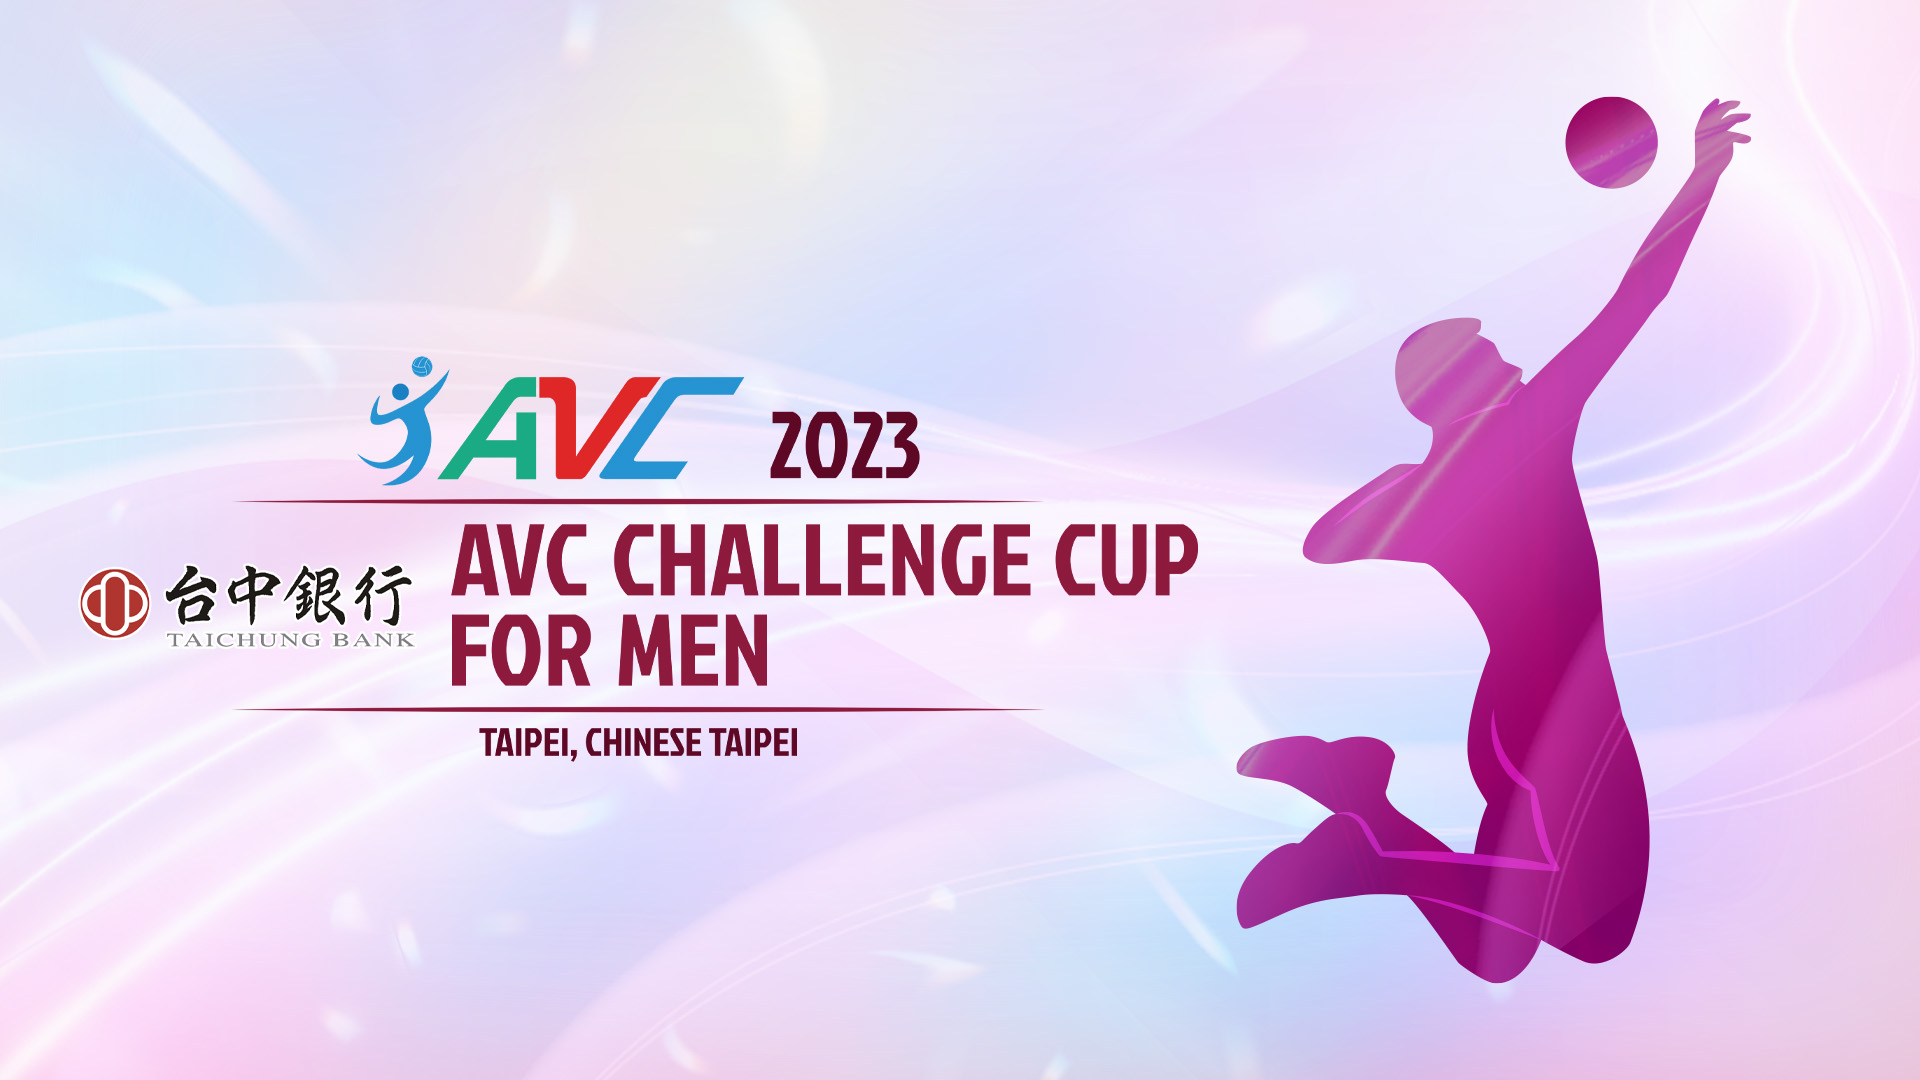 2023 AVC CHALLENGE CUP FOR MEN